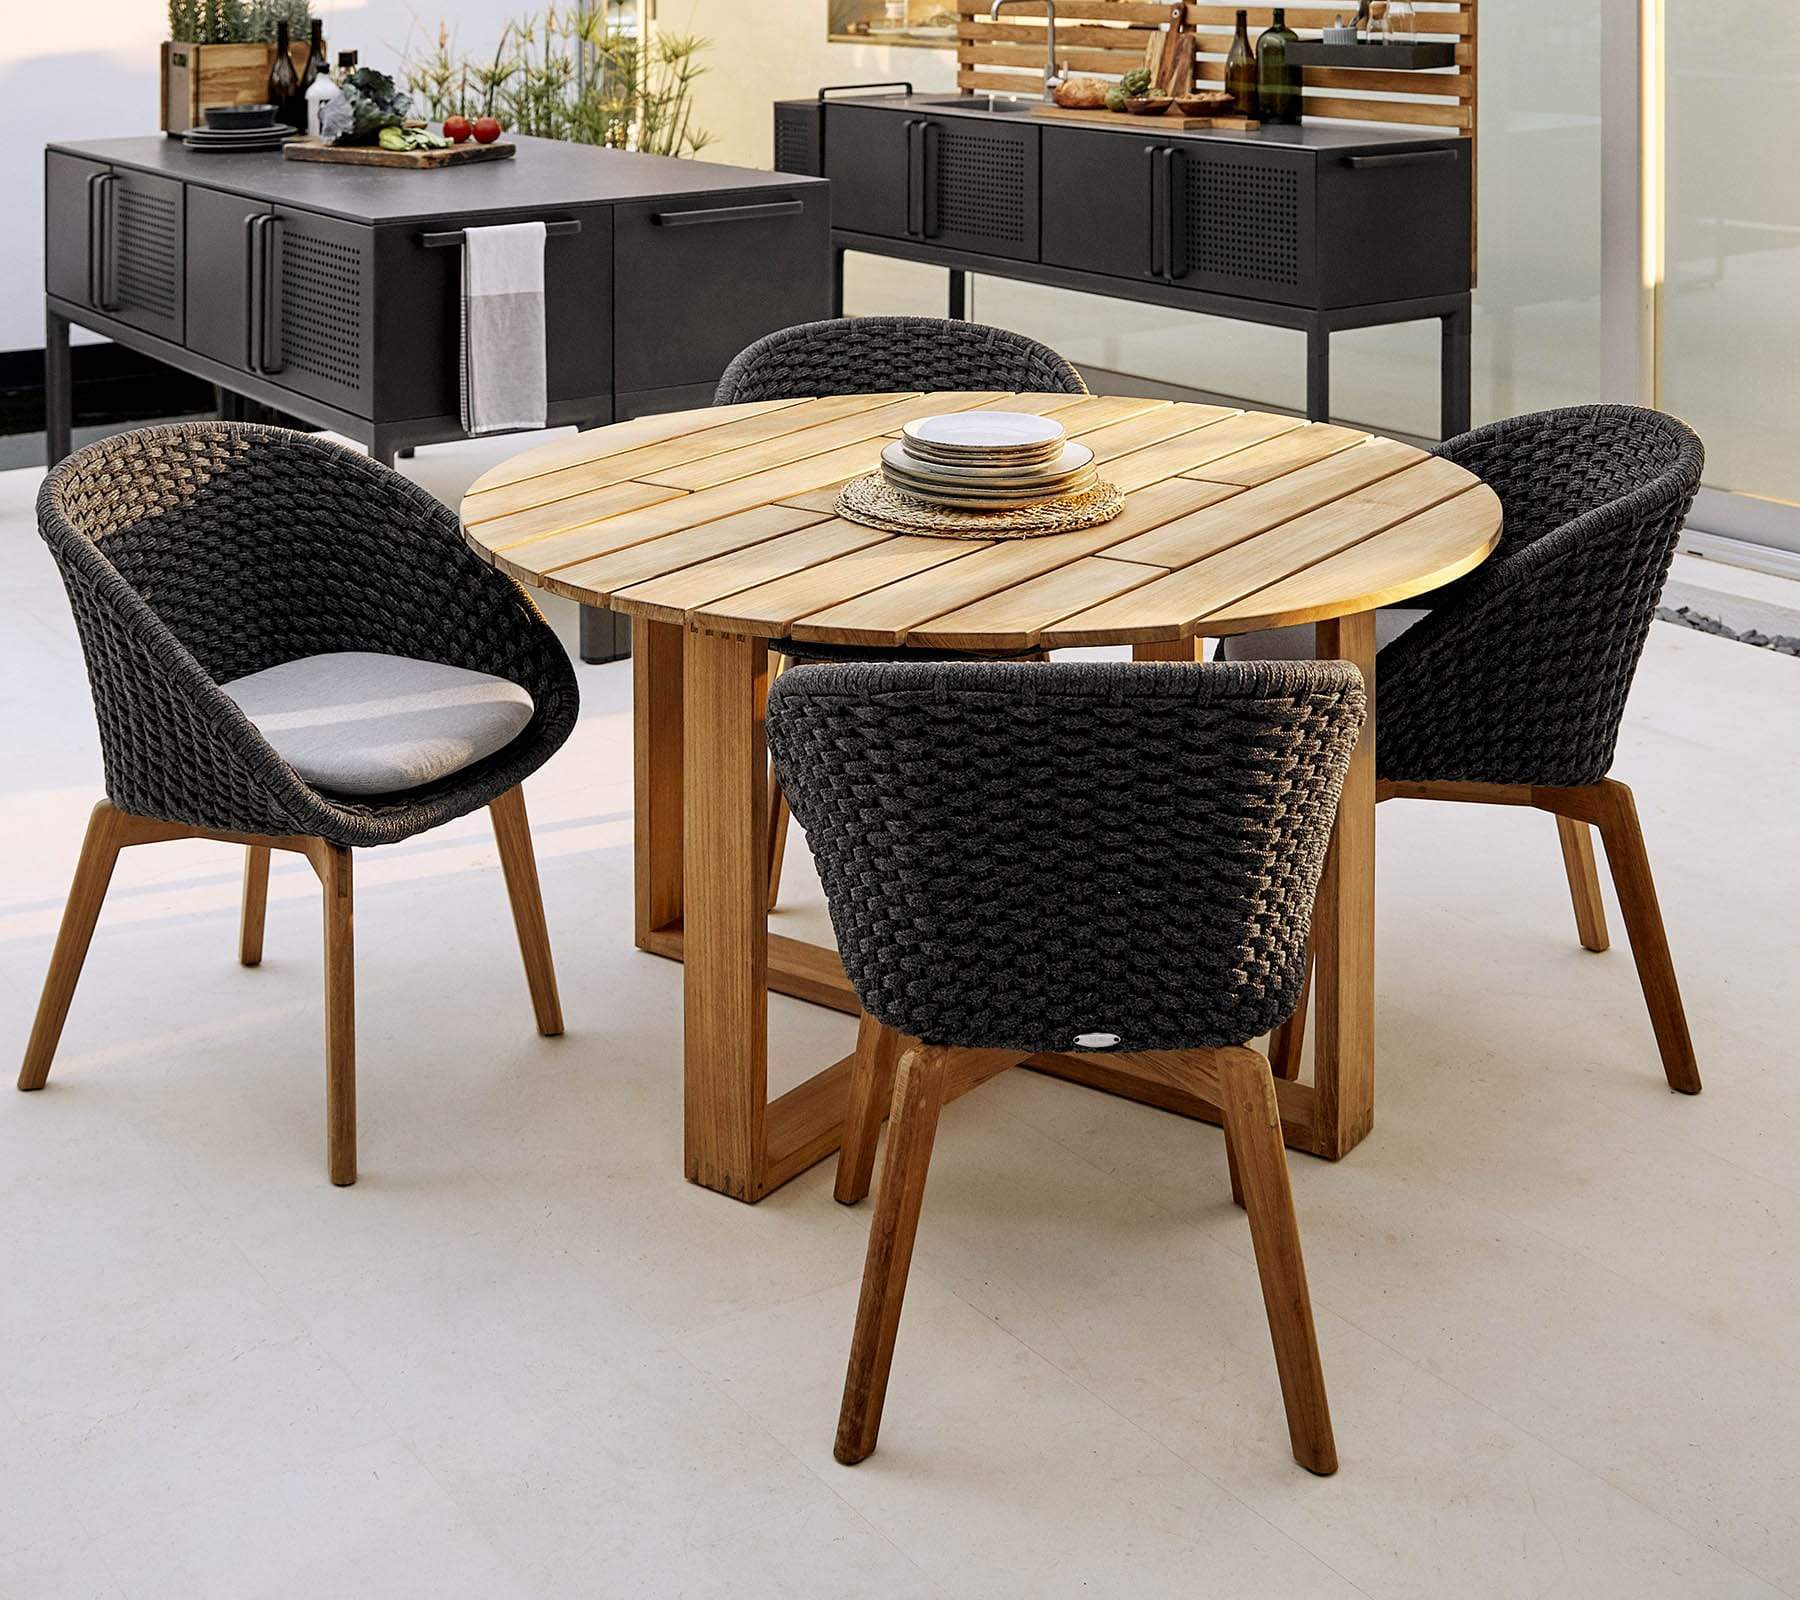 Endless Outdoor Round Dining Table